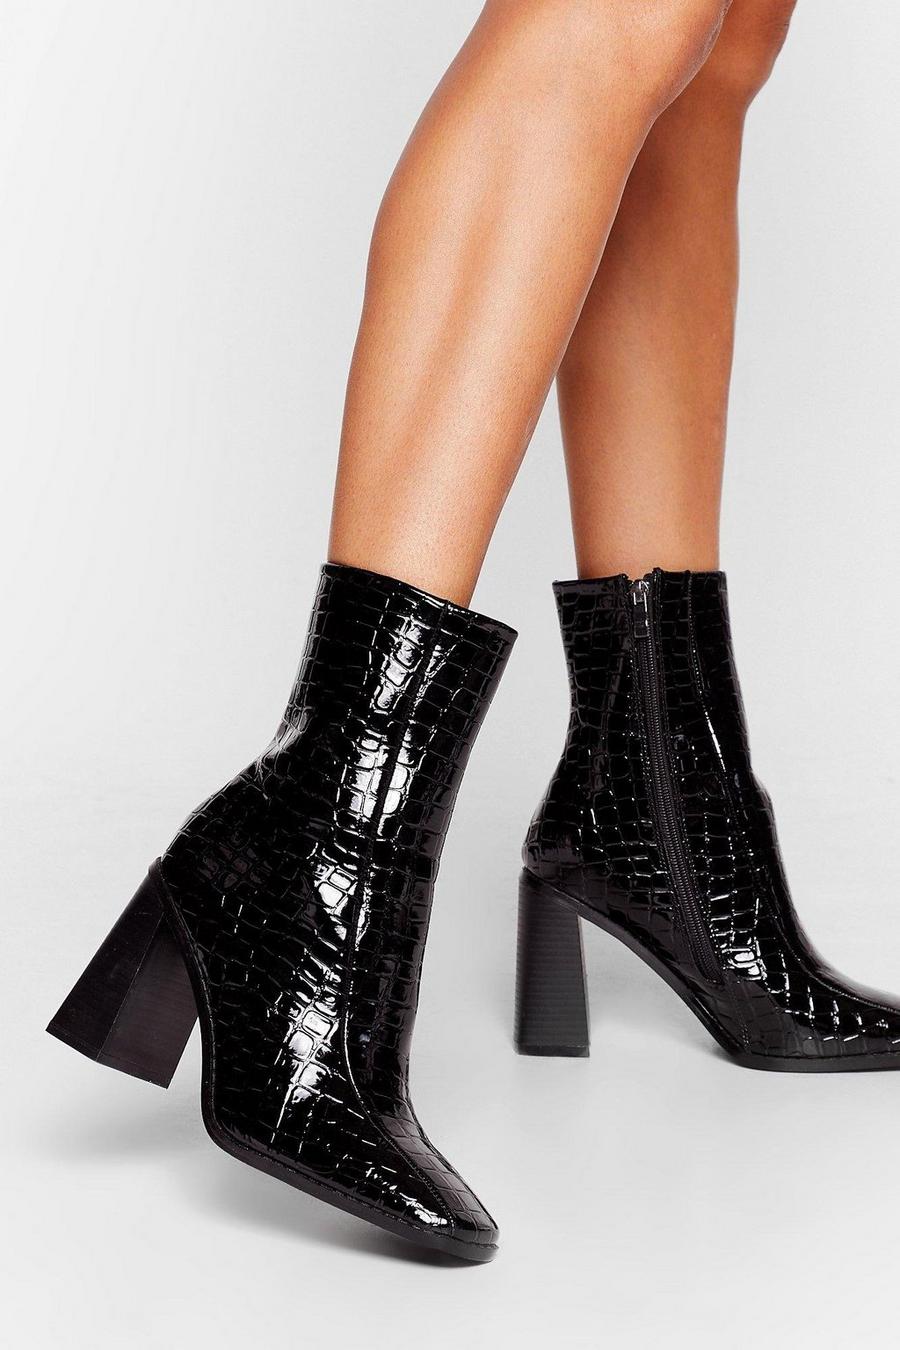 Black negro Taking Flare Of Business Croc Heeled Boots